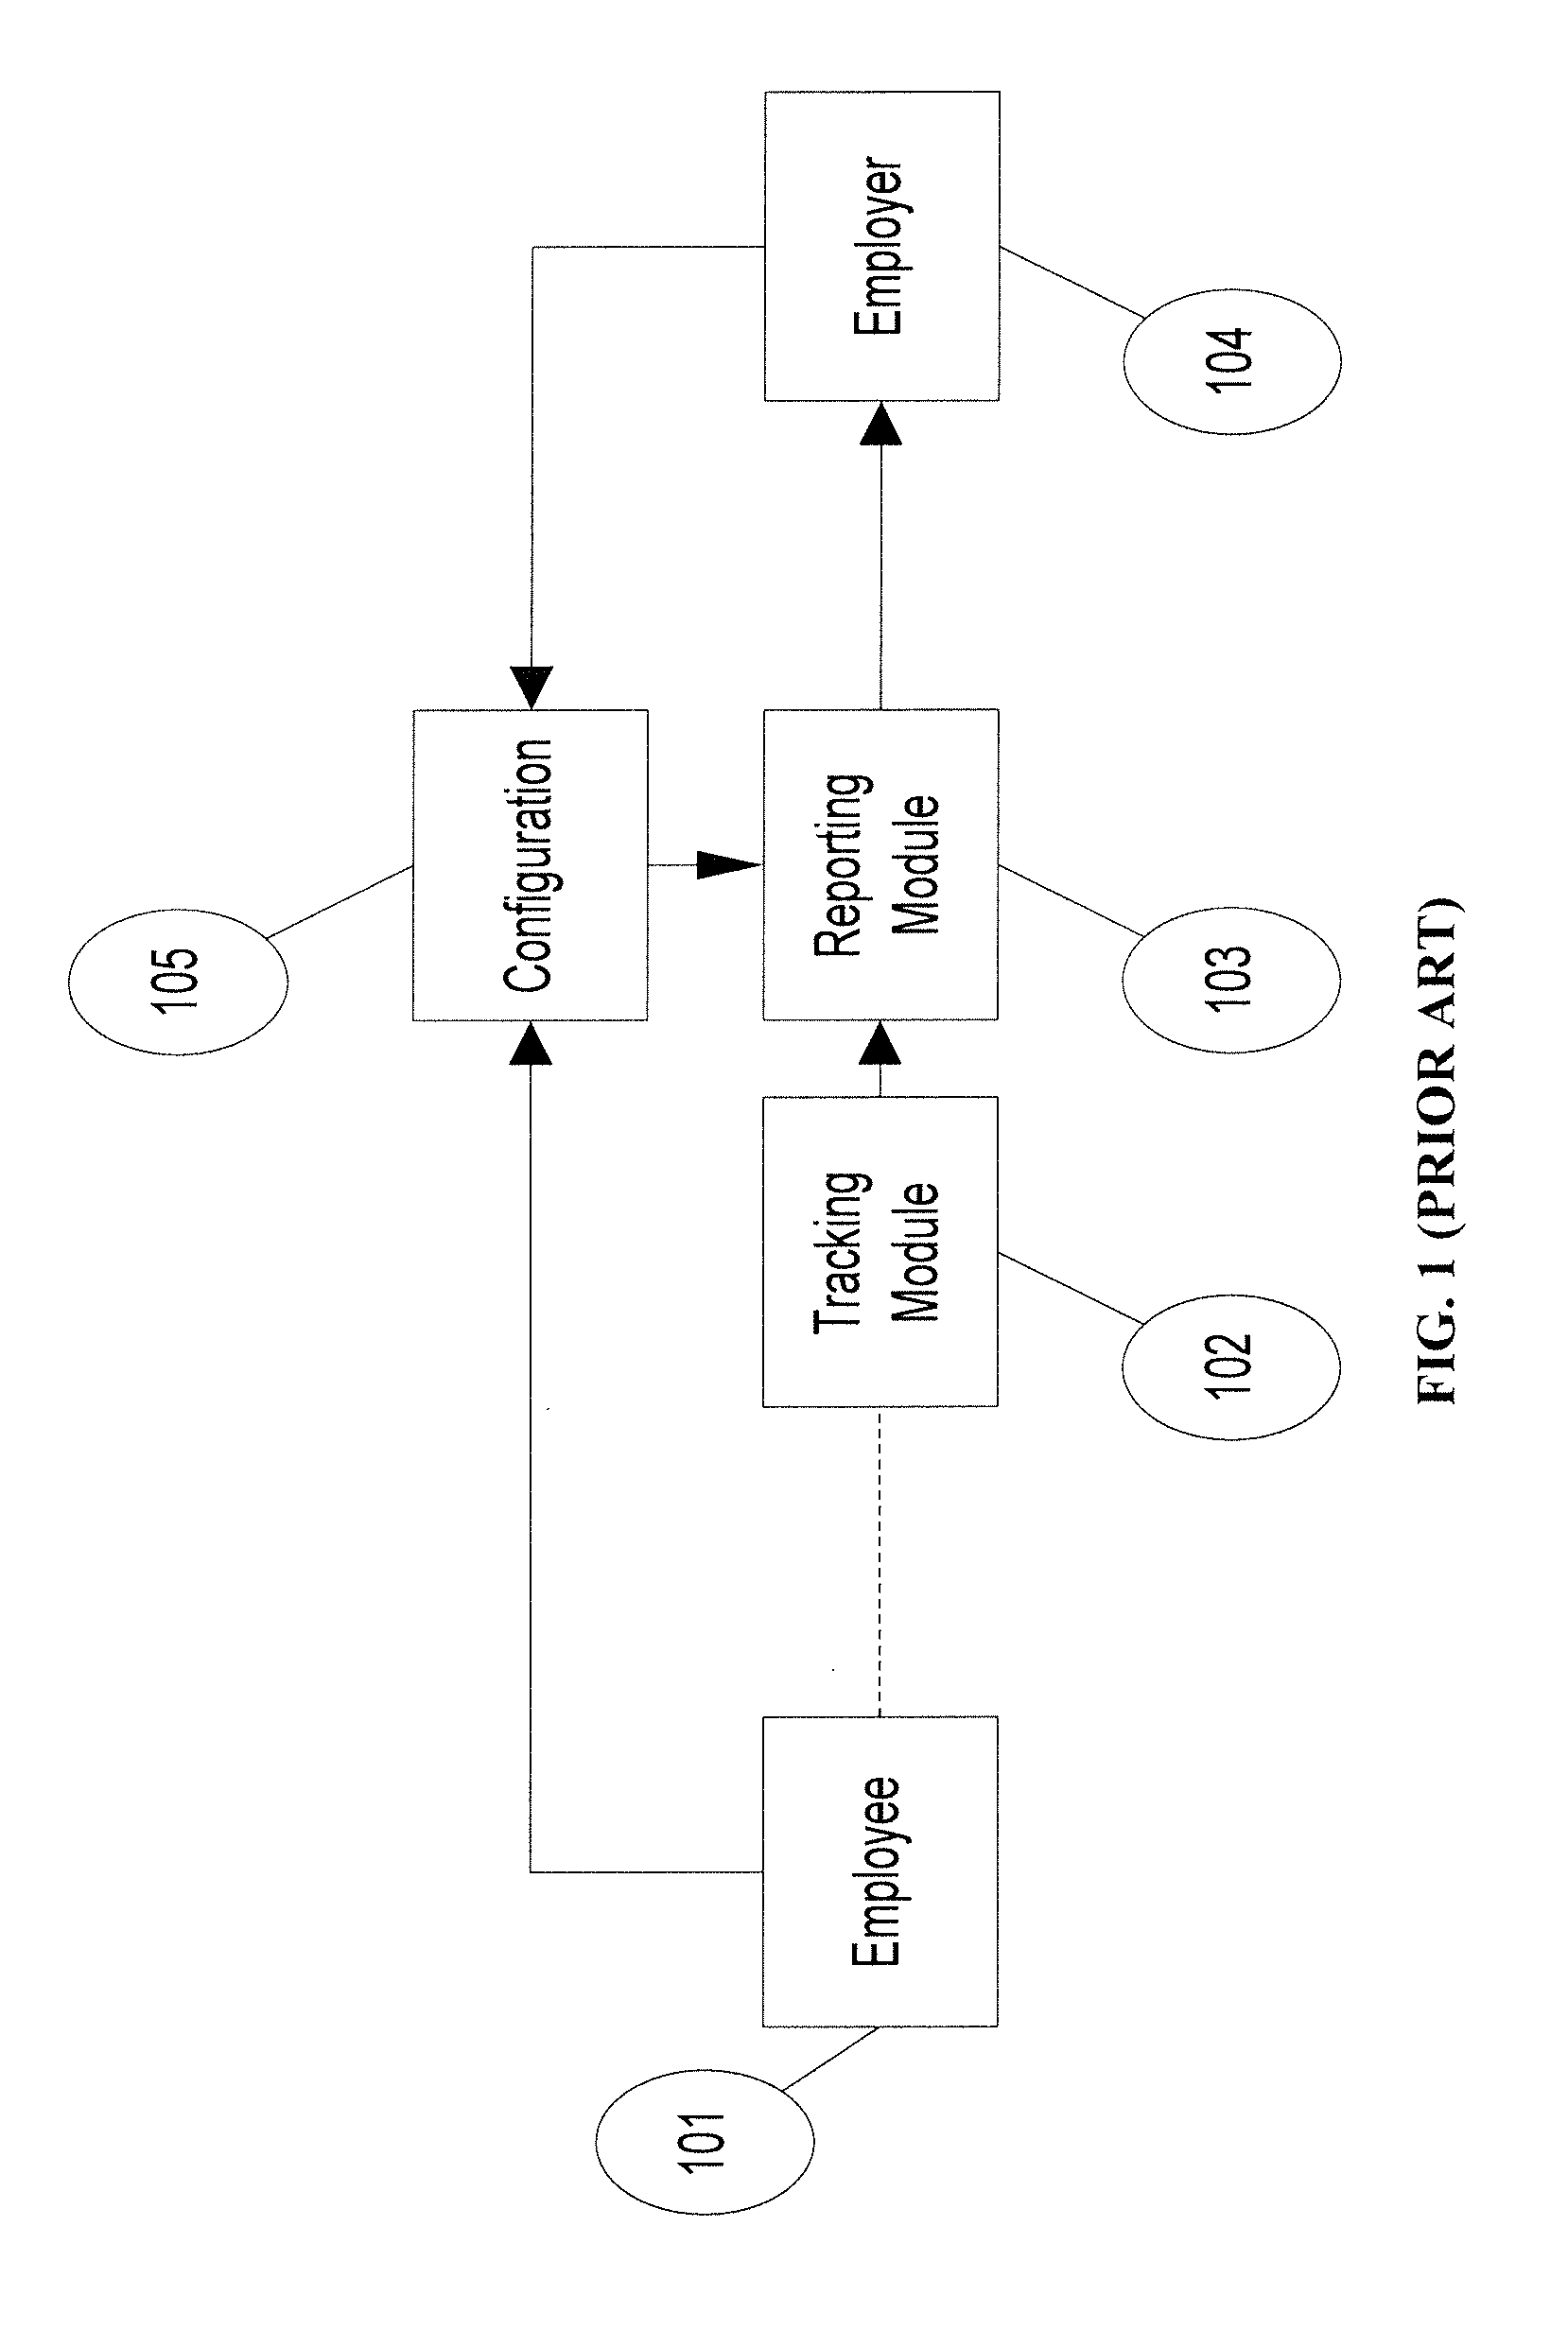 System and method for dynamically monitoring status in location services